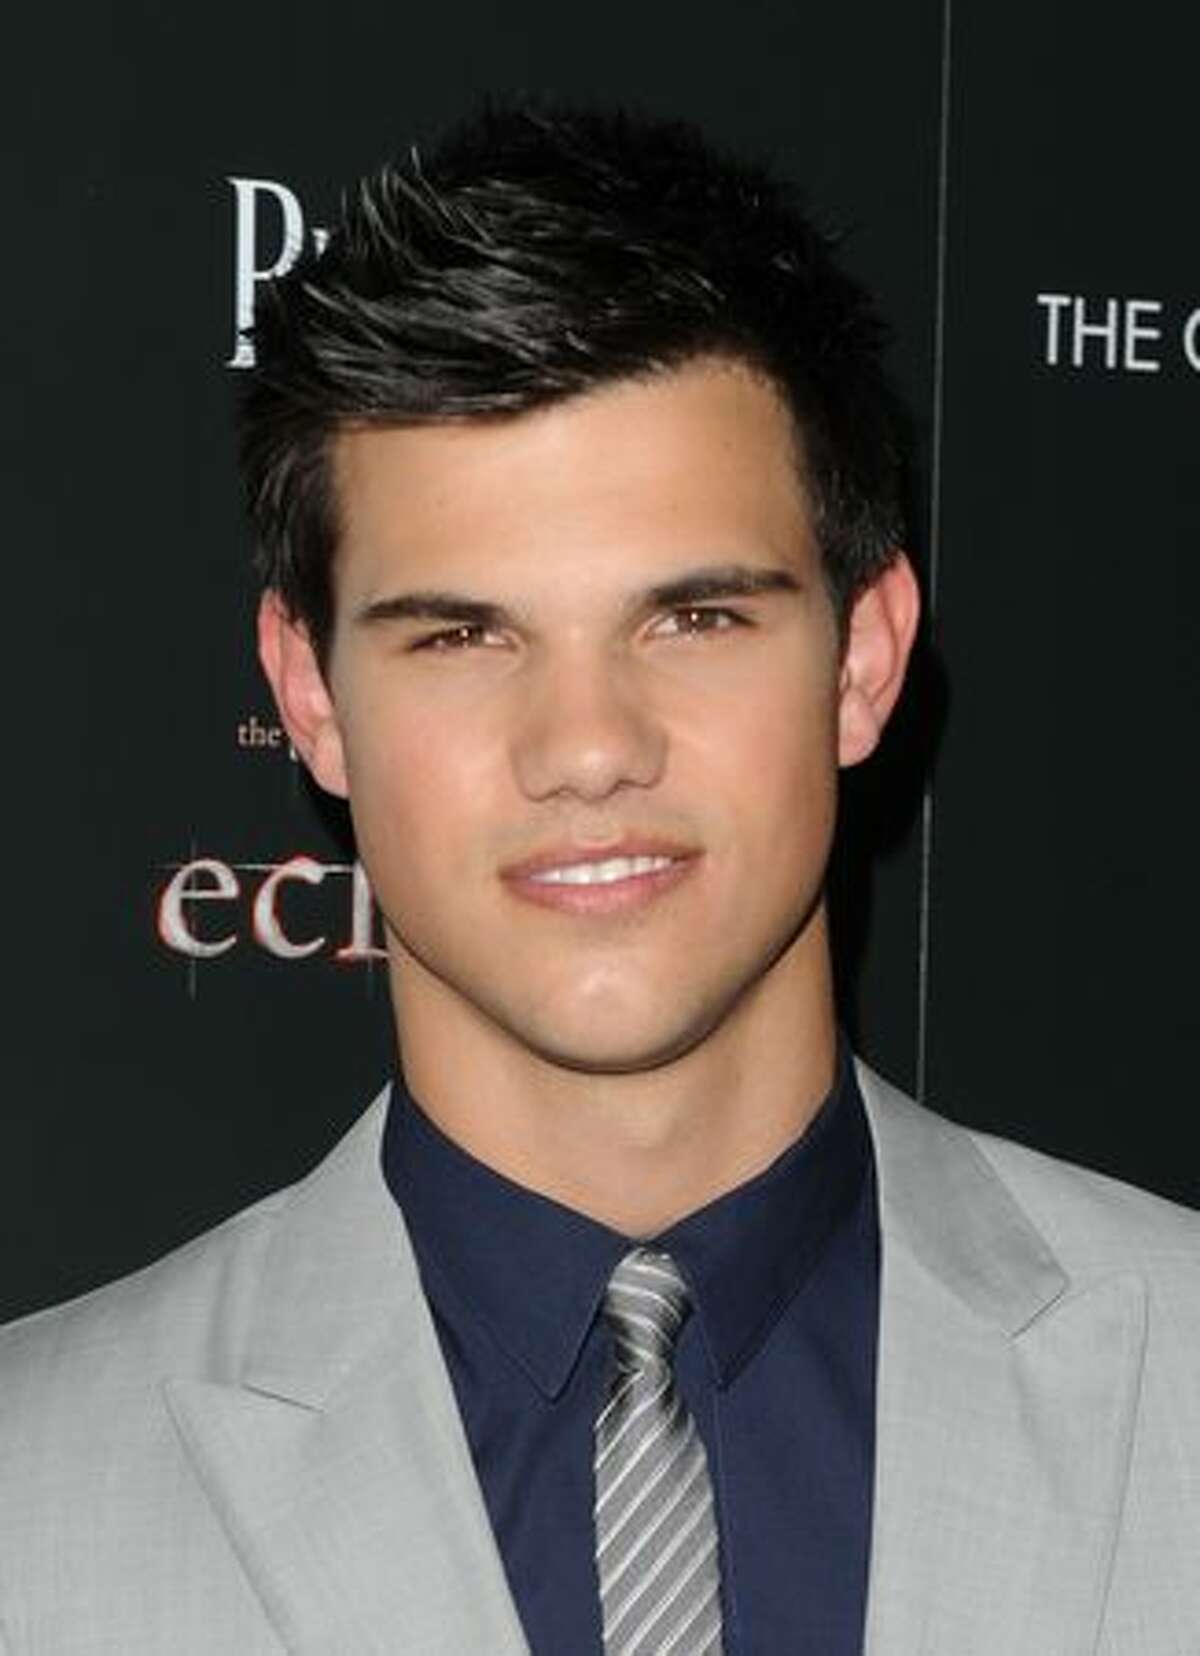 Actor Taylor Lautner attends The Cinema Society Screening Of "The Twilight Saga: Eclipse" at Crosby Street Hotel.